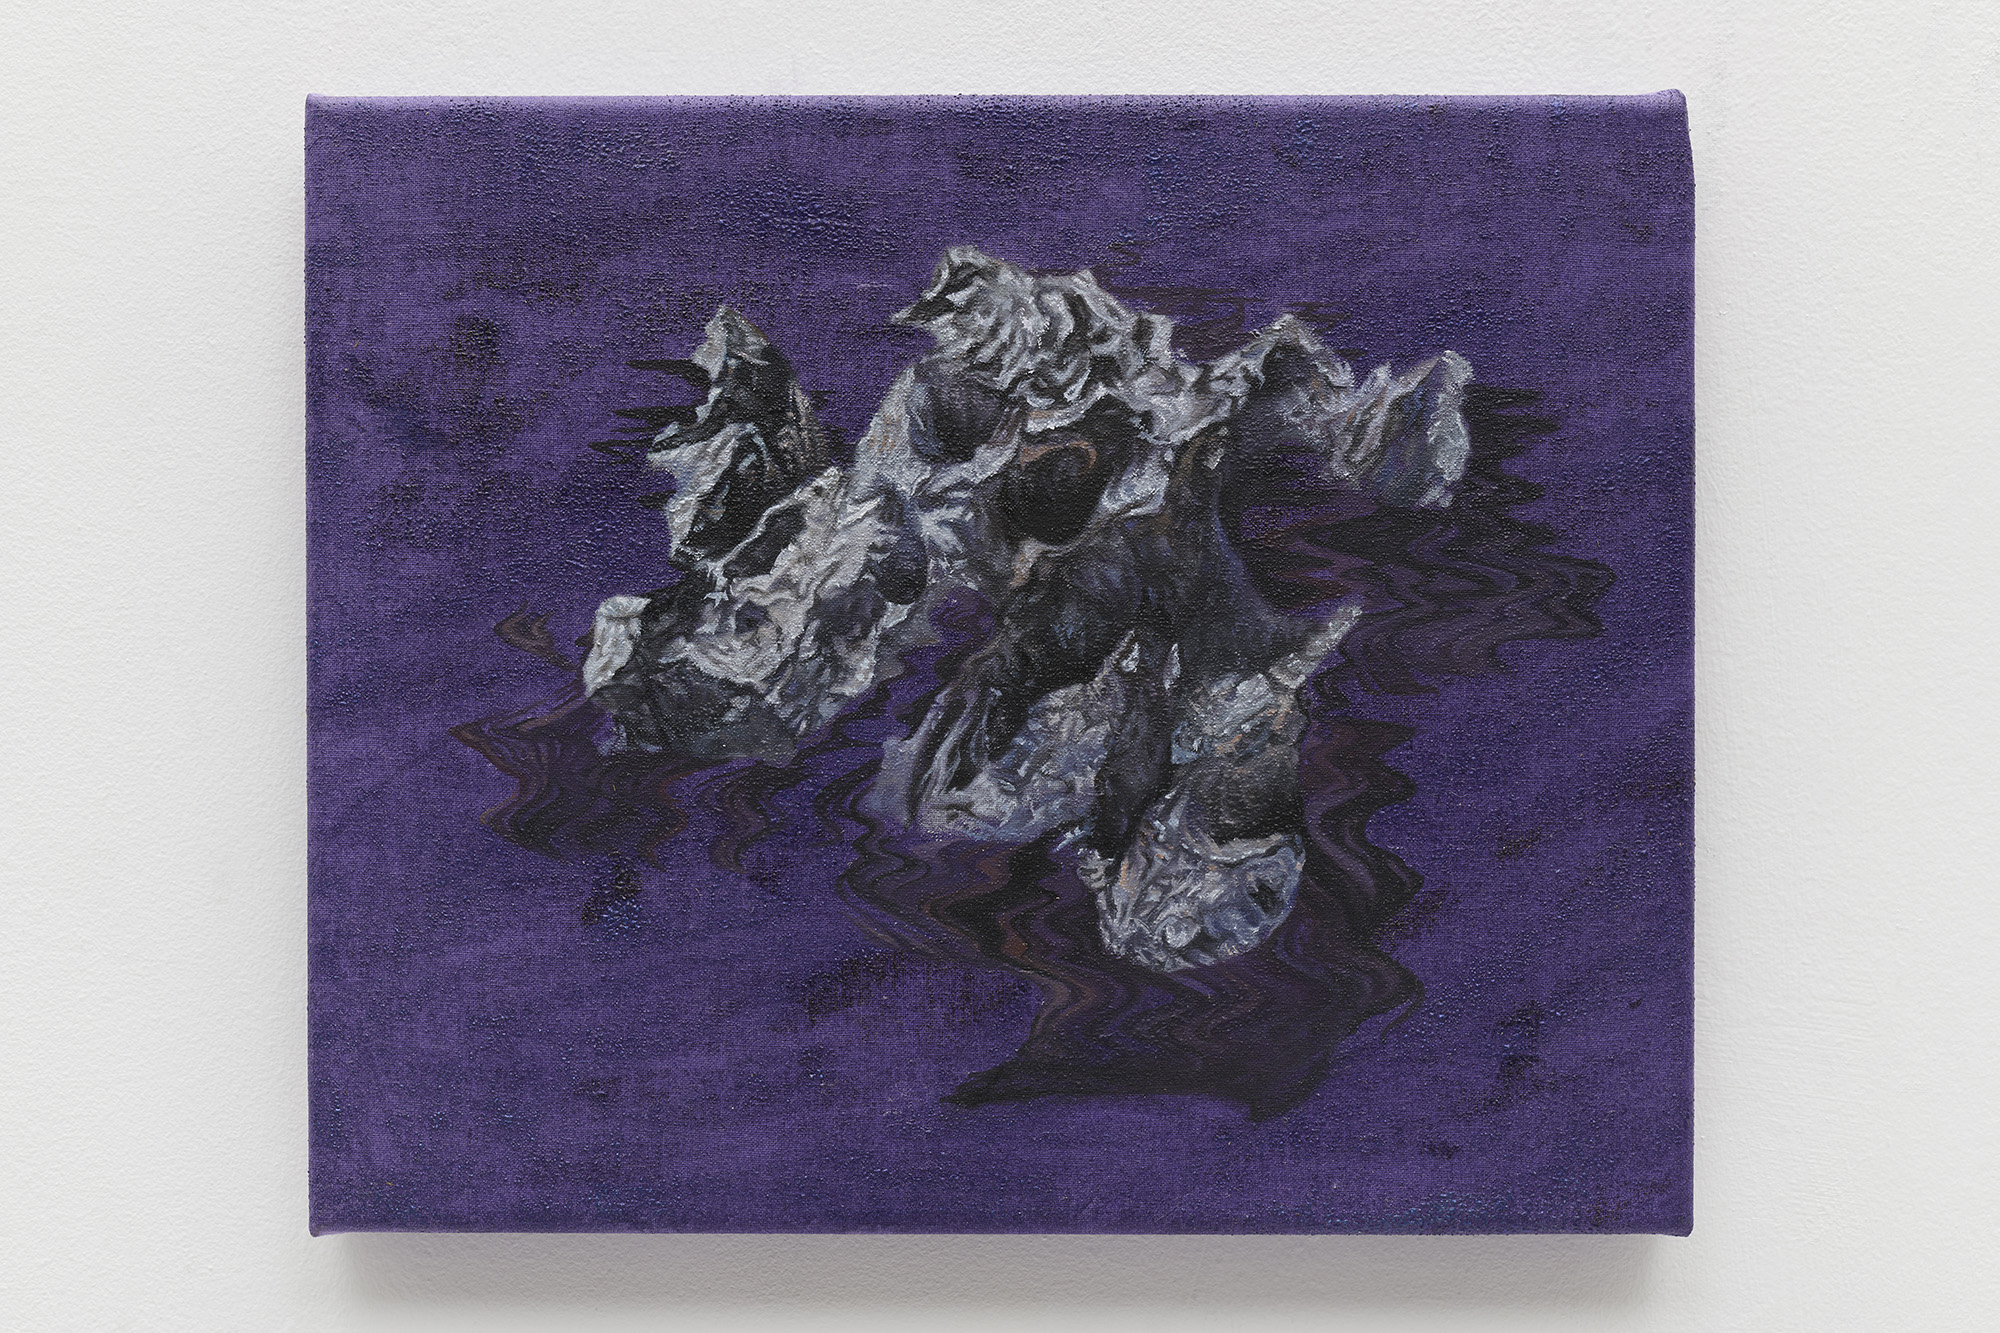 Michael Ho, Purple Currents, Hollowed Stone, 2023, Oil and acrylic on canvas, 25 x 30 cm, 9 7/8 x 11 3/4 in.